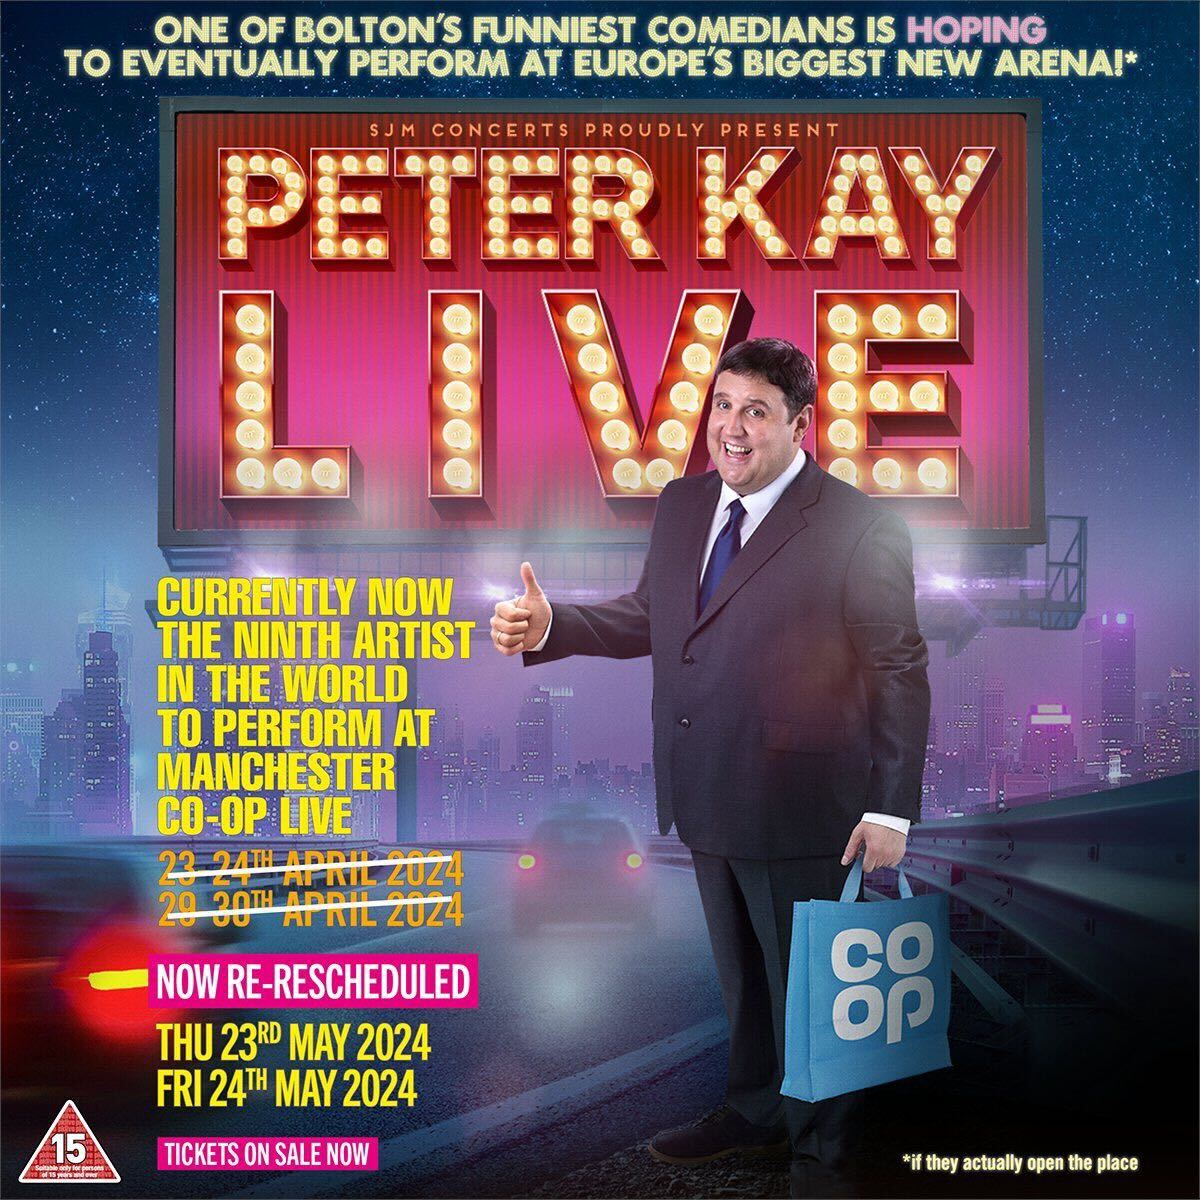 Peter Kay poked fun at Co-op Live in his event poster. Credit: Peter Kay